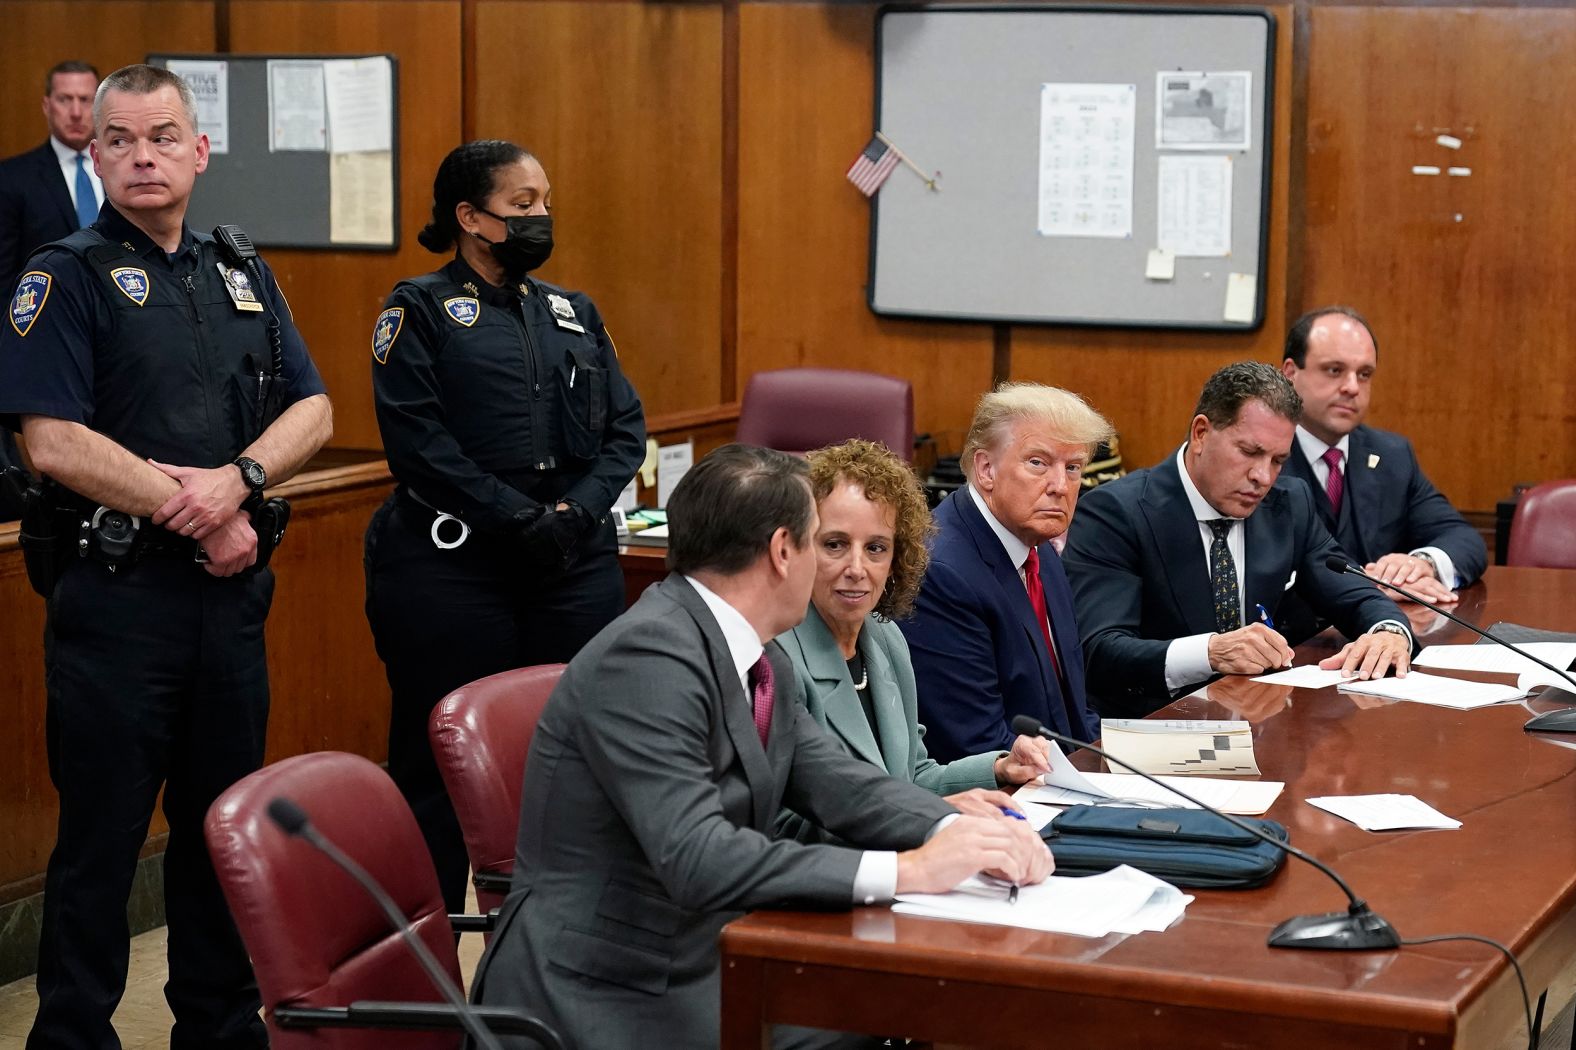 Trump sits with his defense team at his arraignment in New York in April 2023. The former president <a href="http://www.cnn.com/2023/03/31/politics/gallery/trump-indictment/index.html" target="_blank">pleaded not guilty</a> to 34 felony criminal charges of falsifying business records. It is the first time in history that a current or former US president has been criminally charged.